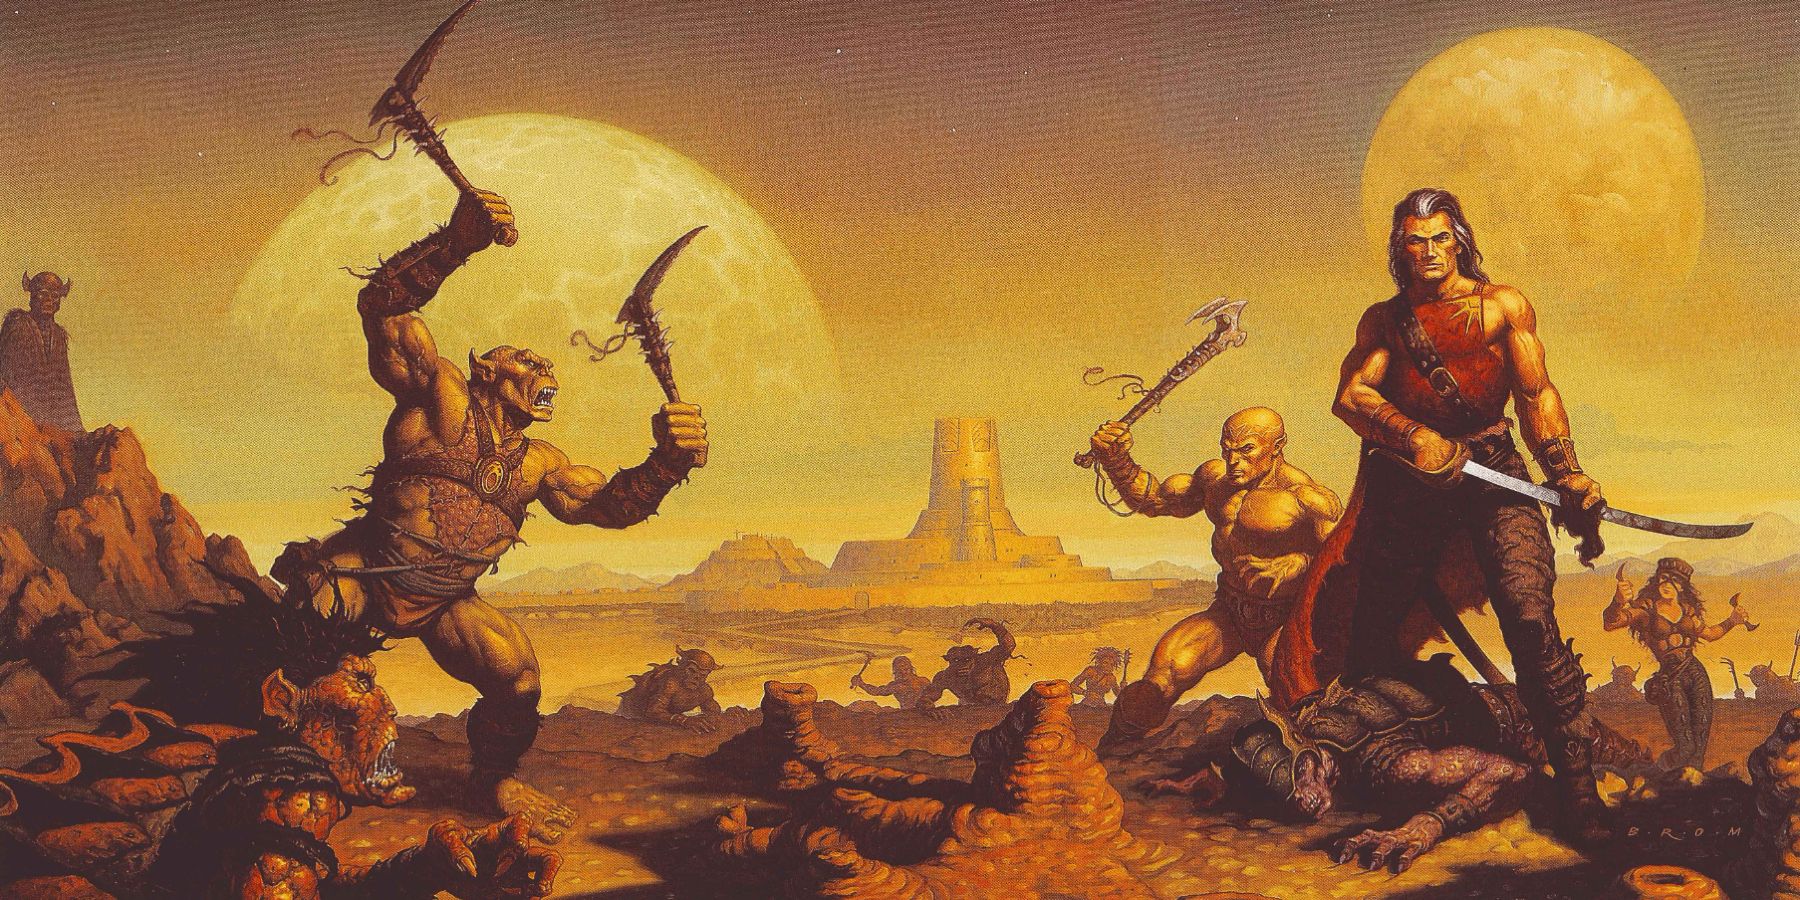 DnD: Now Is the Perfect Time to Bring Dark Sun to 5e